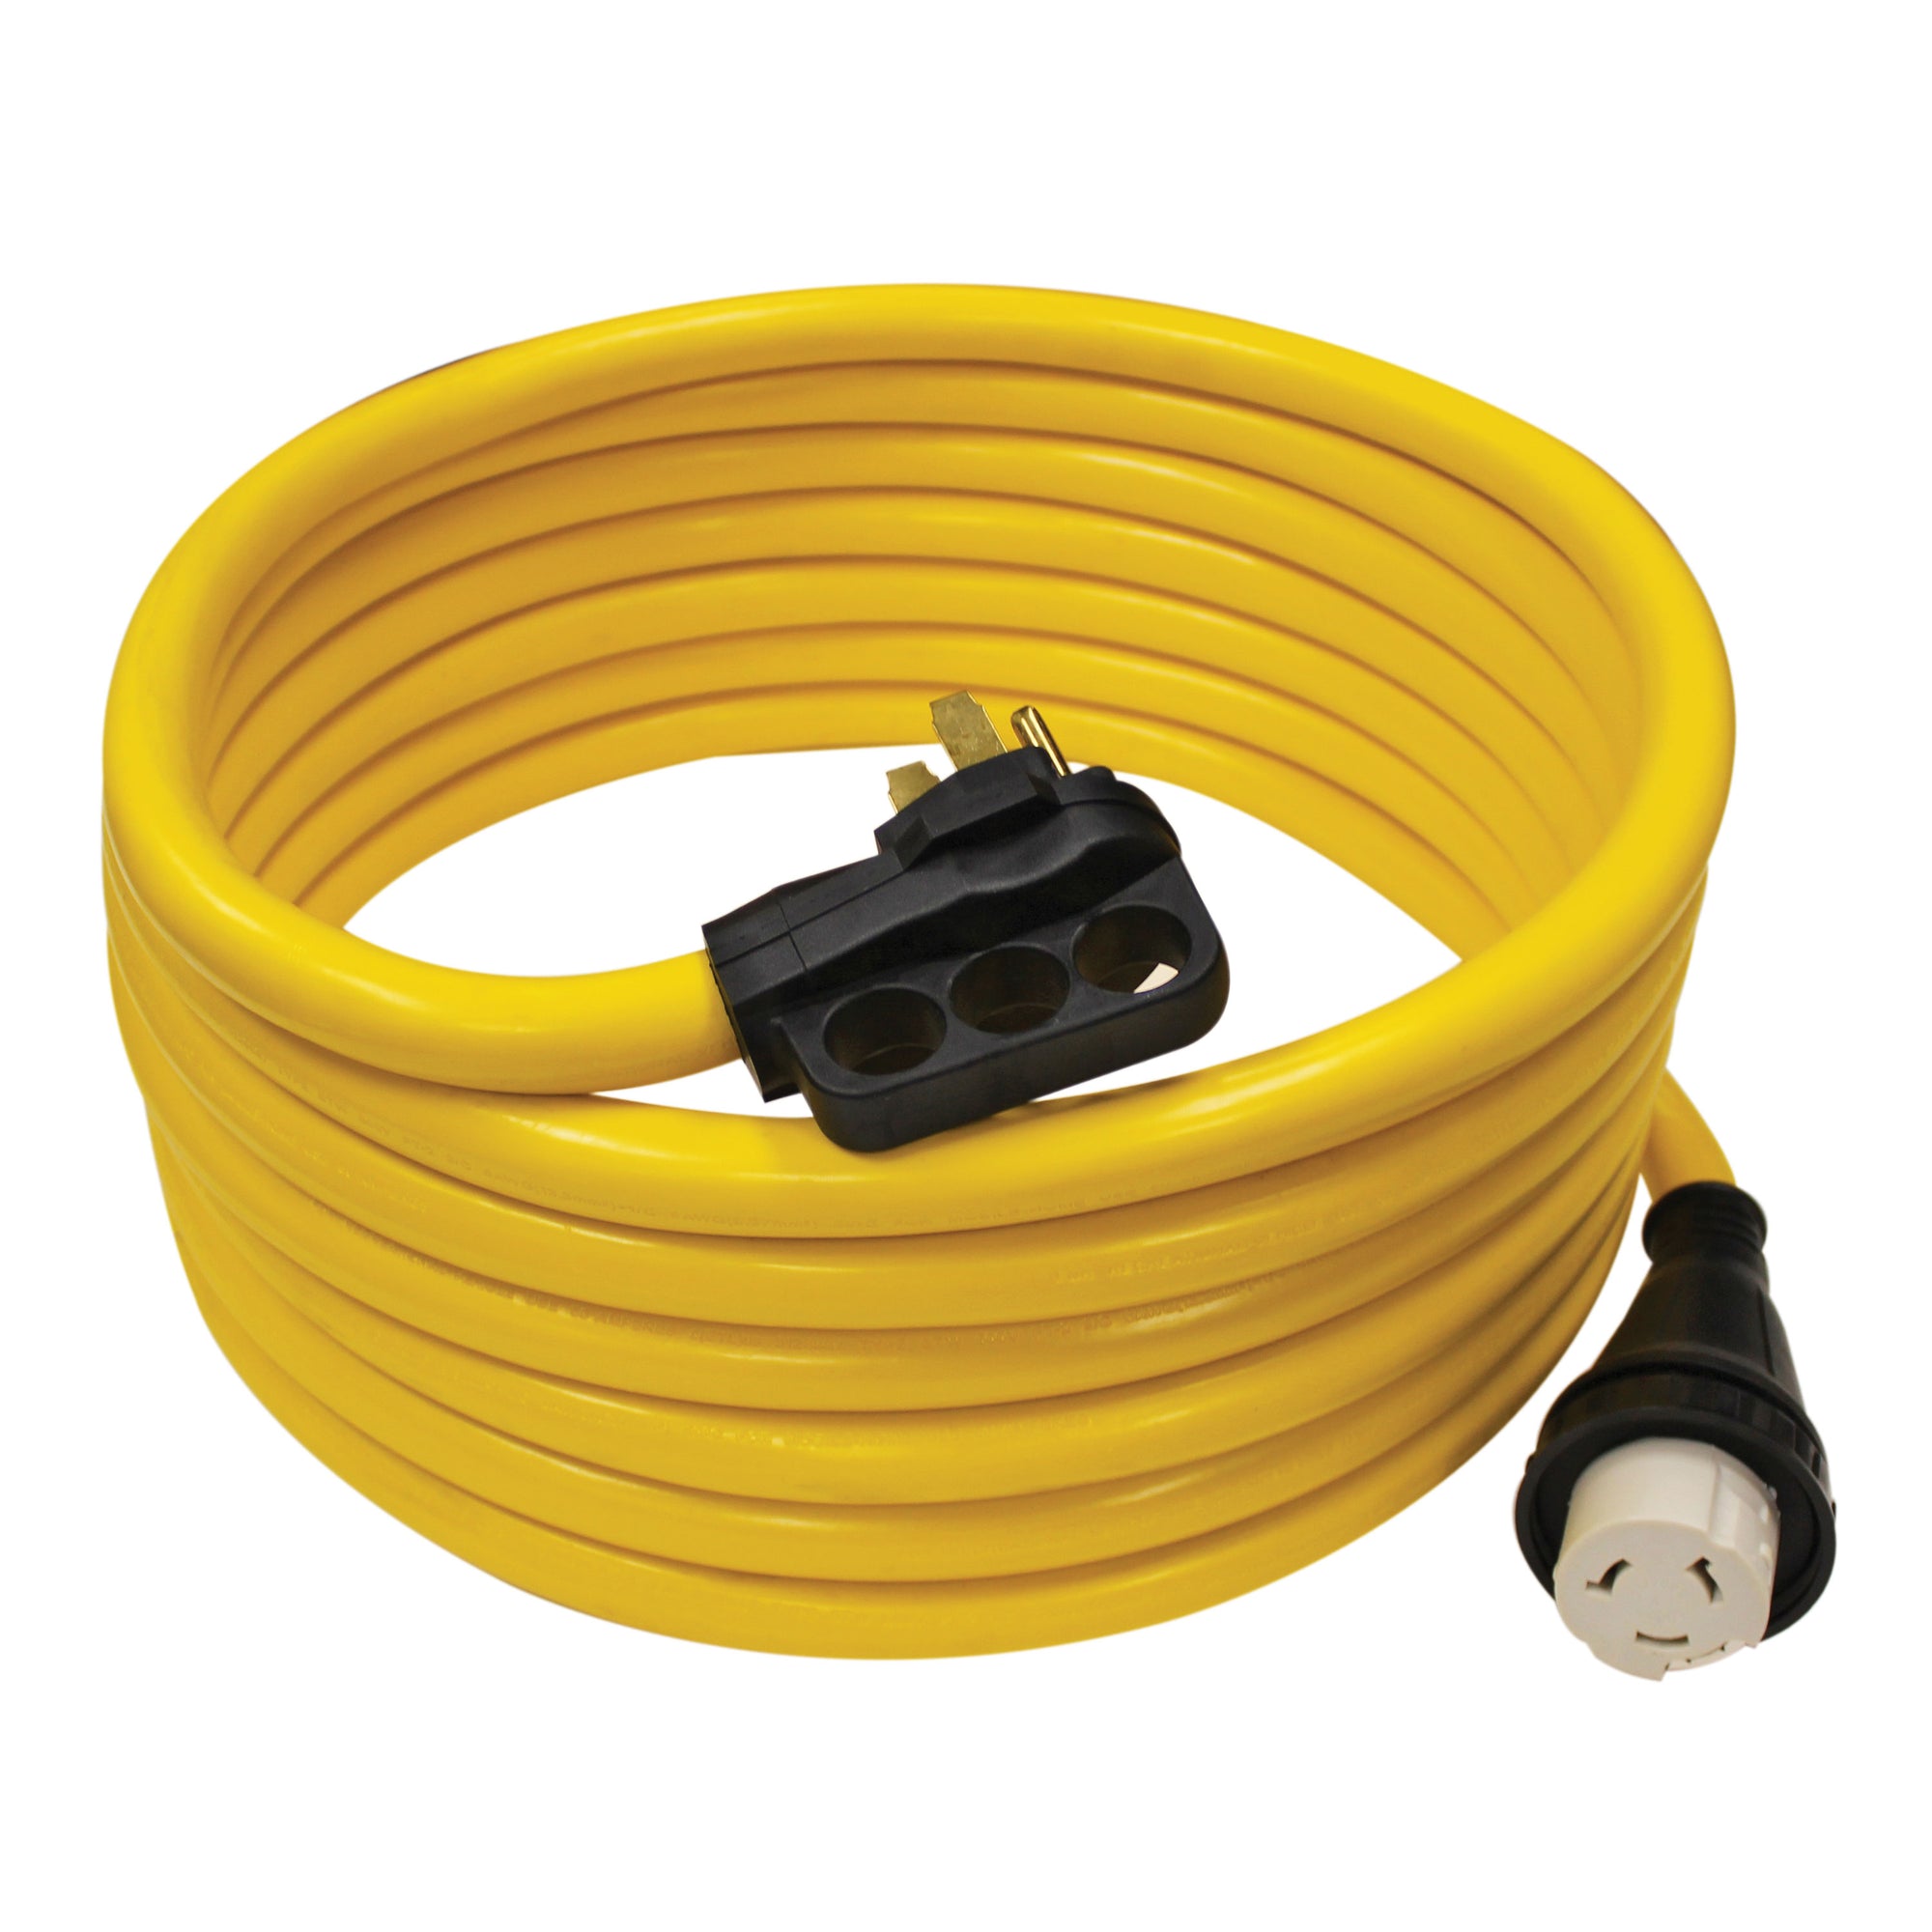 50' 50 AMP RV CORD WITH CONNECTOR PLUG W/HANDLES